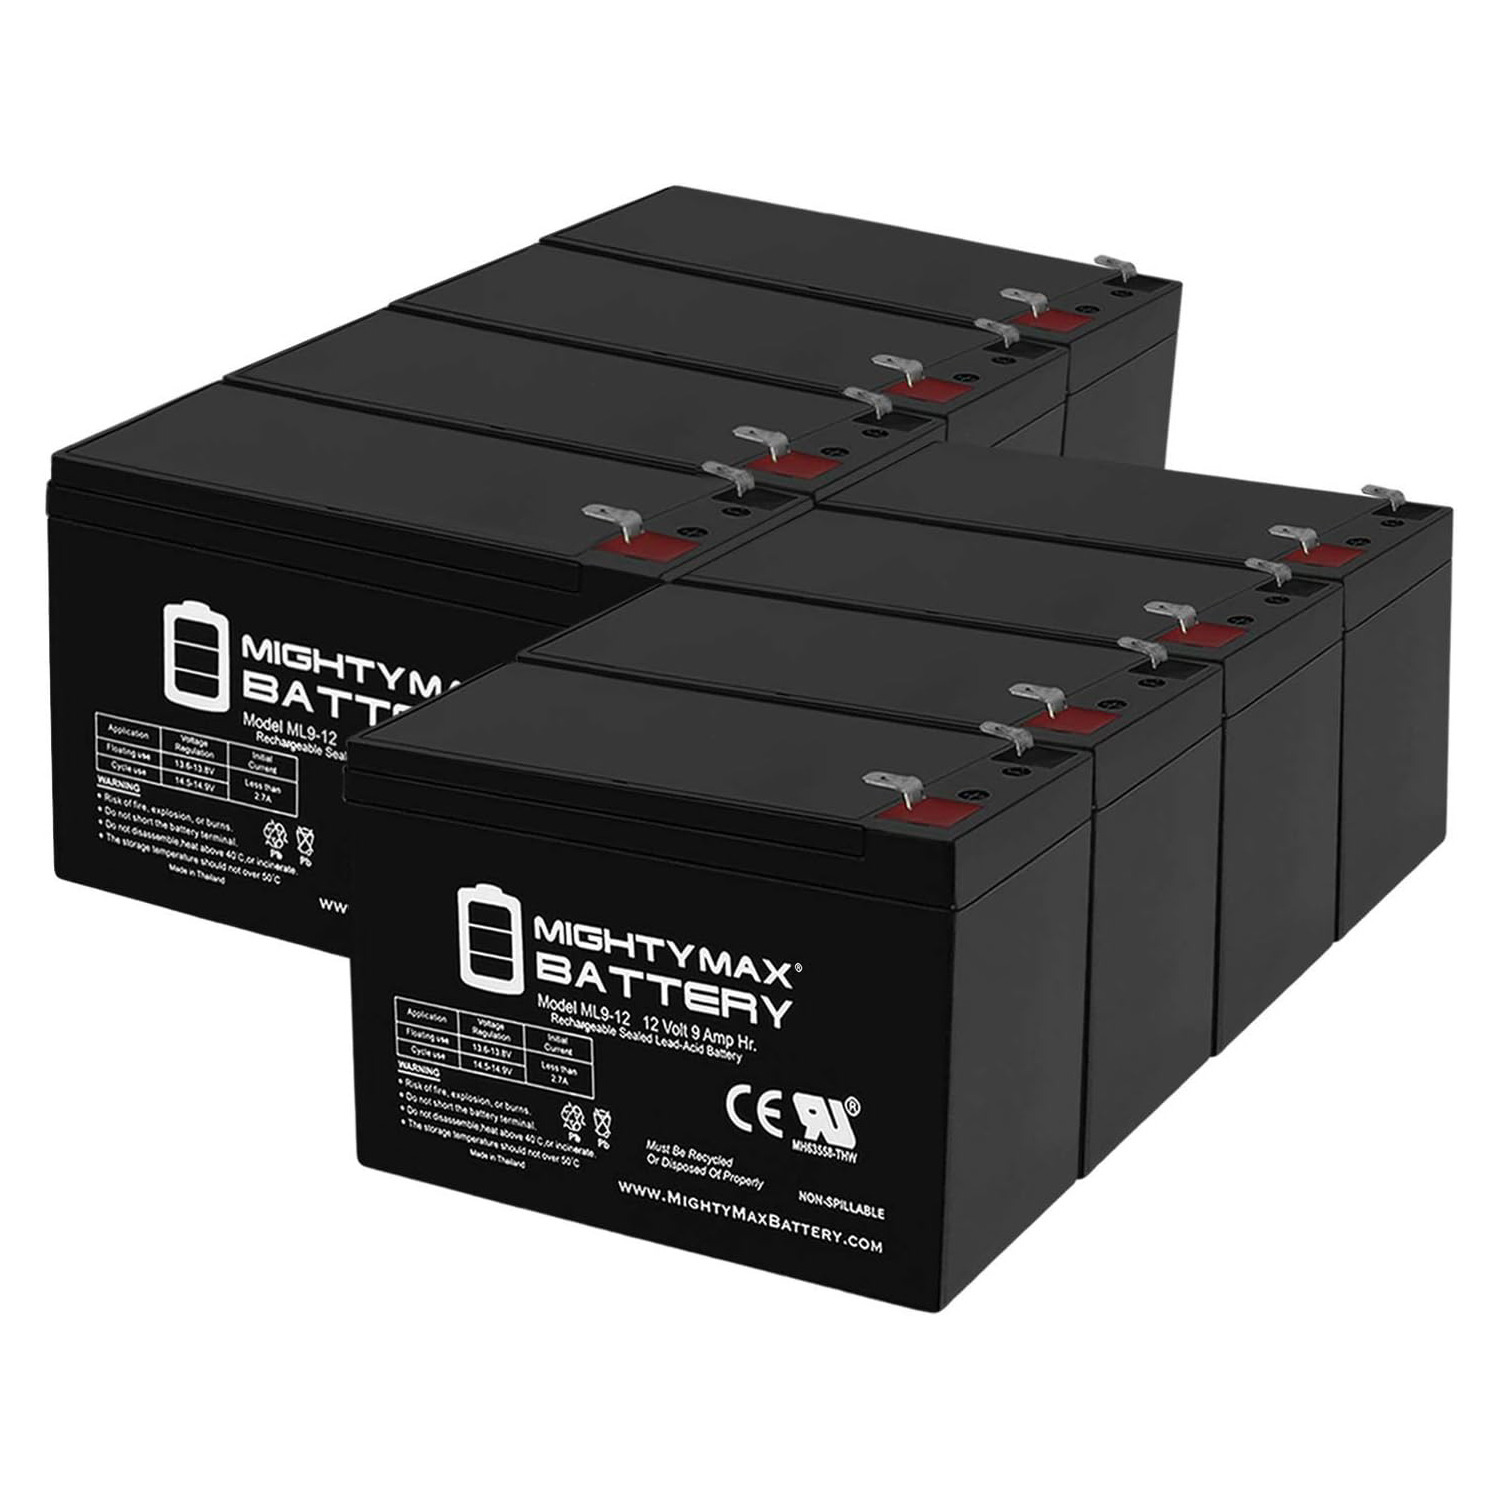 Altronix SMP5PMCTXPD4CB 12V, 9Ah Lead Acid Battery - 8 Pack